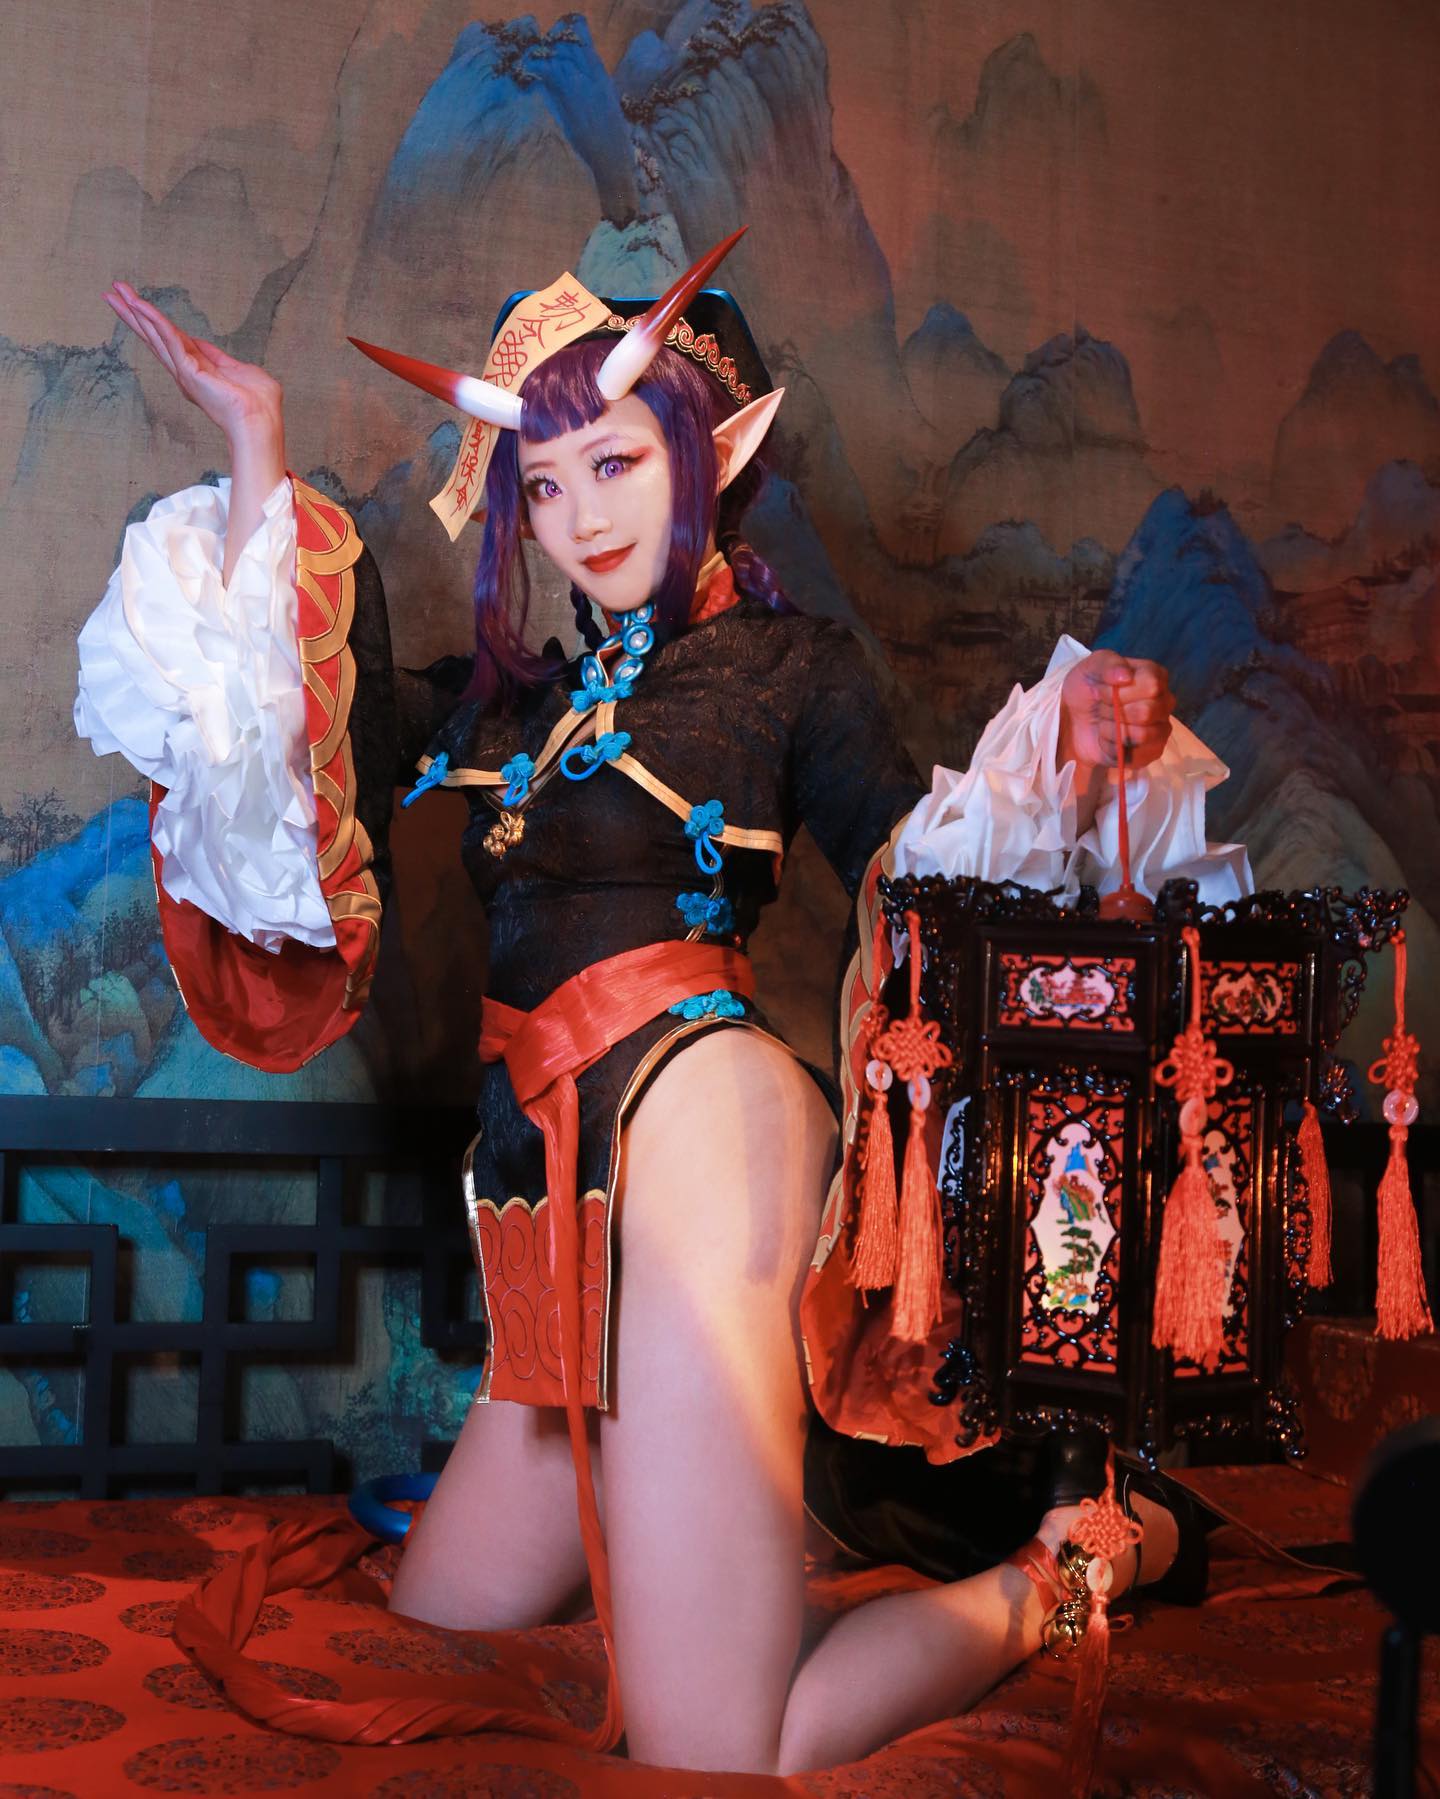 Who will I see at Anime NYC?! 🗽 I am trying to finalize my lineup…
Also follow my new account @alicealtmodel 🎀
👹Character: Shuten Doji (Halloween Jiangshi version) from Fate Grand Order
📍: @mysticpalace_wanxianggong
📸: @langshuw
______________________
#cosplay #horrorfan #animenyc #shutendouji #shutendoji #shutendoujicosplay #jiangshi #cosplayersofinstagram #cosplayer #cos #coser #コスプレ #คอสเพลย์ #코스프레 #角色扮演 #cosplaymodel #cosplayphotography #cosplayphotoshoot #asiancosplayer #fate #fgo #fategrandorder #fatecosplay #kawaii #anime #fgocosplay #chinesemythology #monstergirl #demongirl #kumikunai